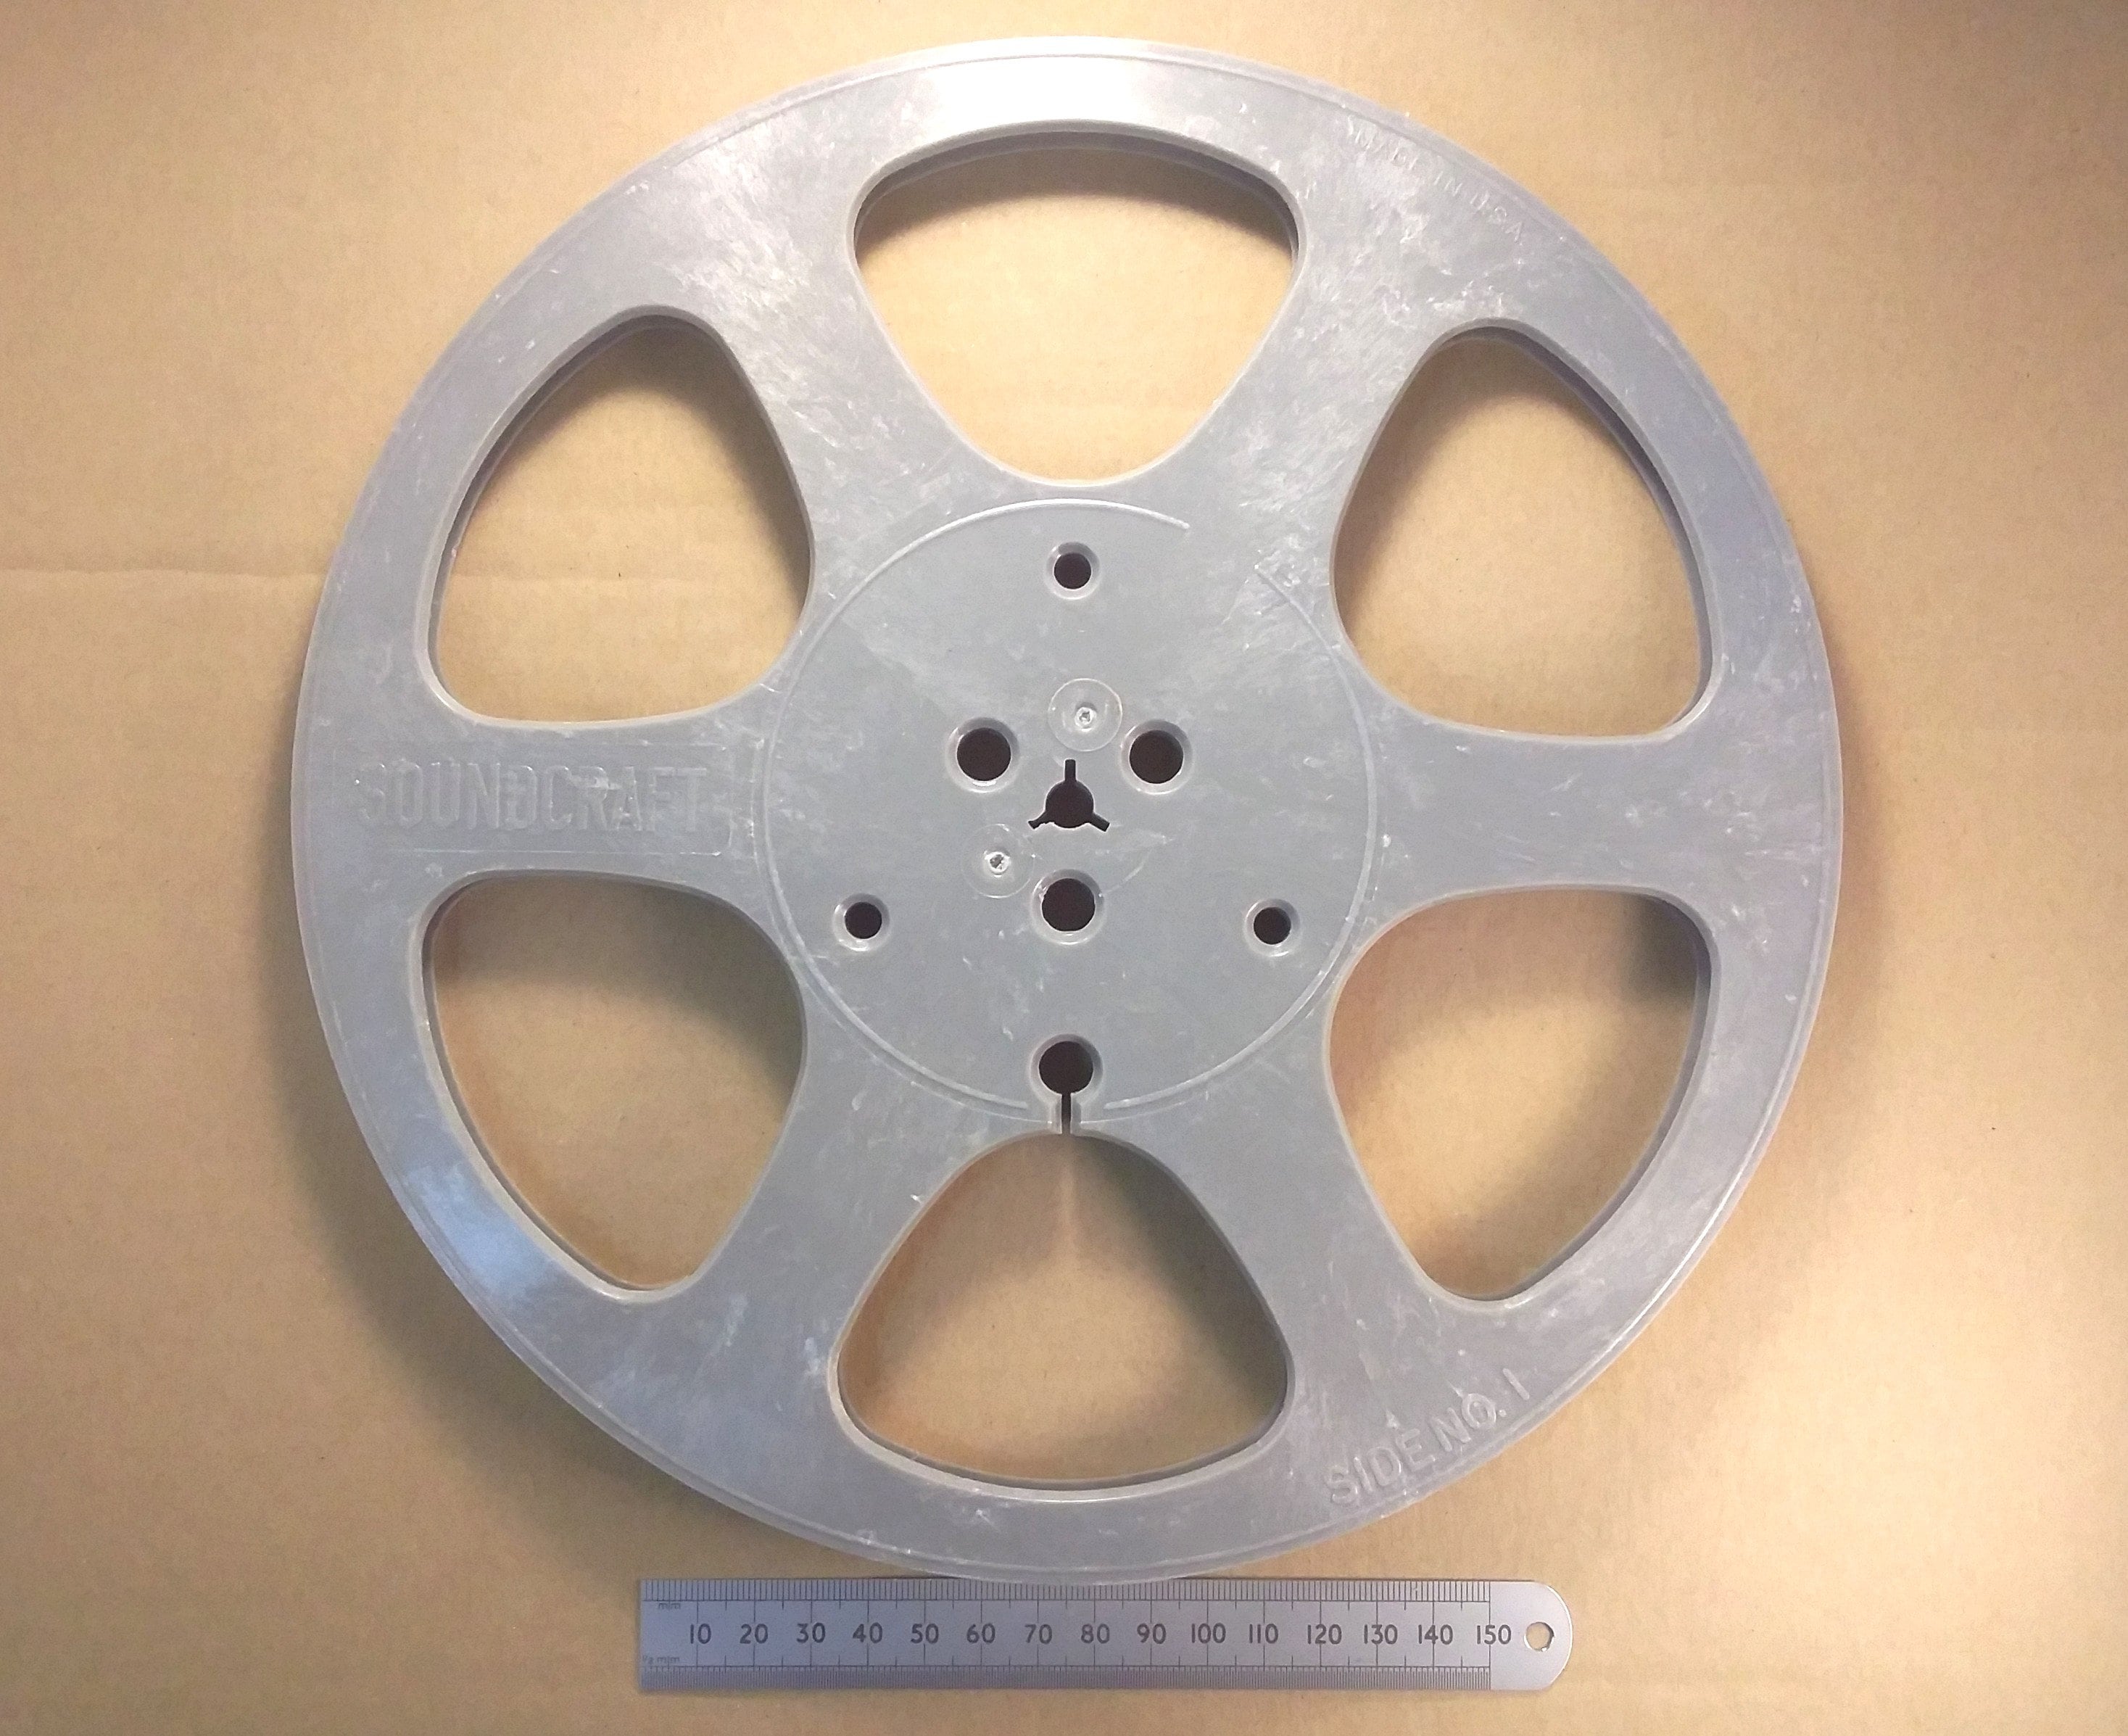 10.5 Inch 267mm Reel Recording Empty Take up Tape Spool by